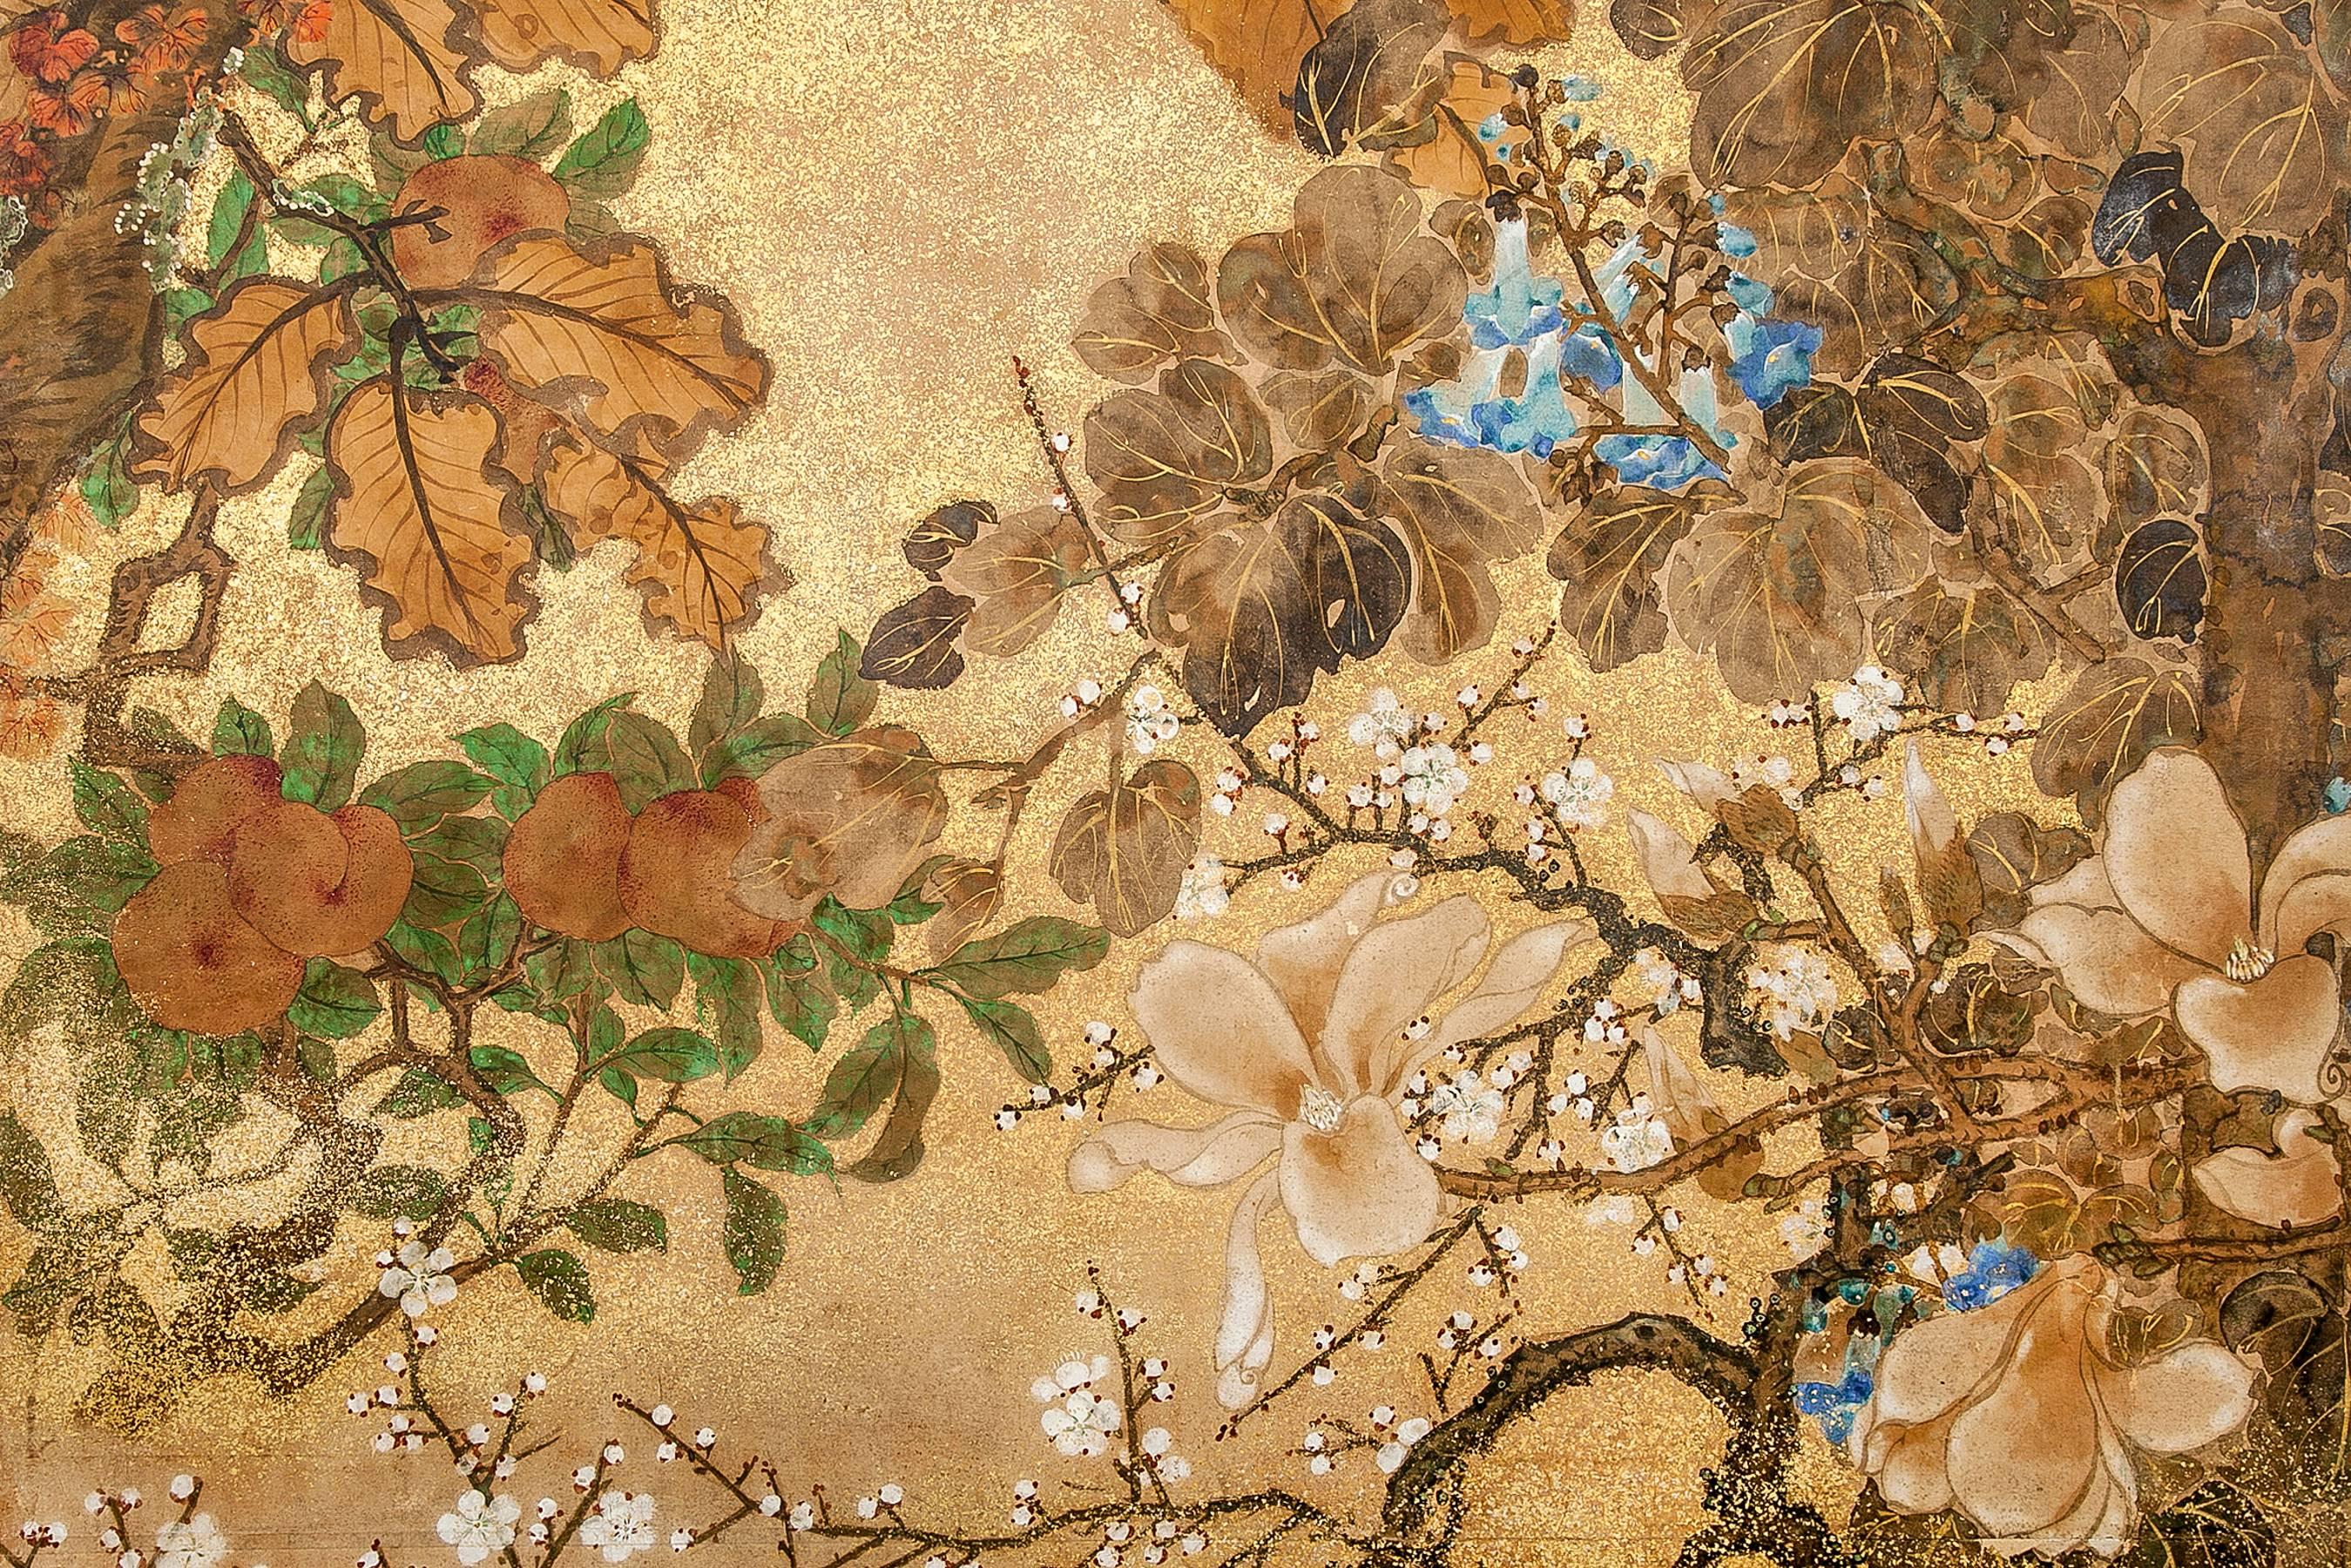 Floral landscape with gold dust on mulberry paper.
One of a pair.